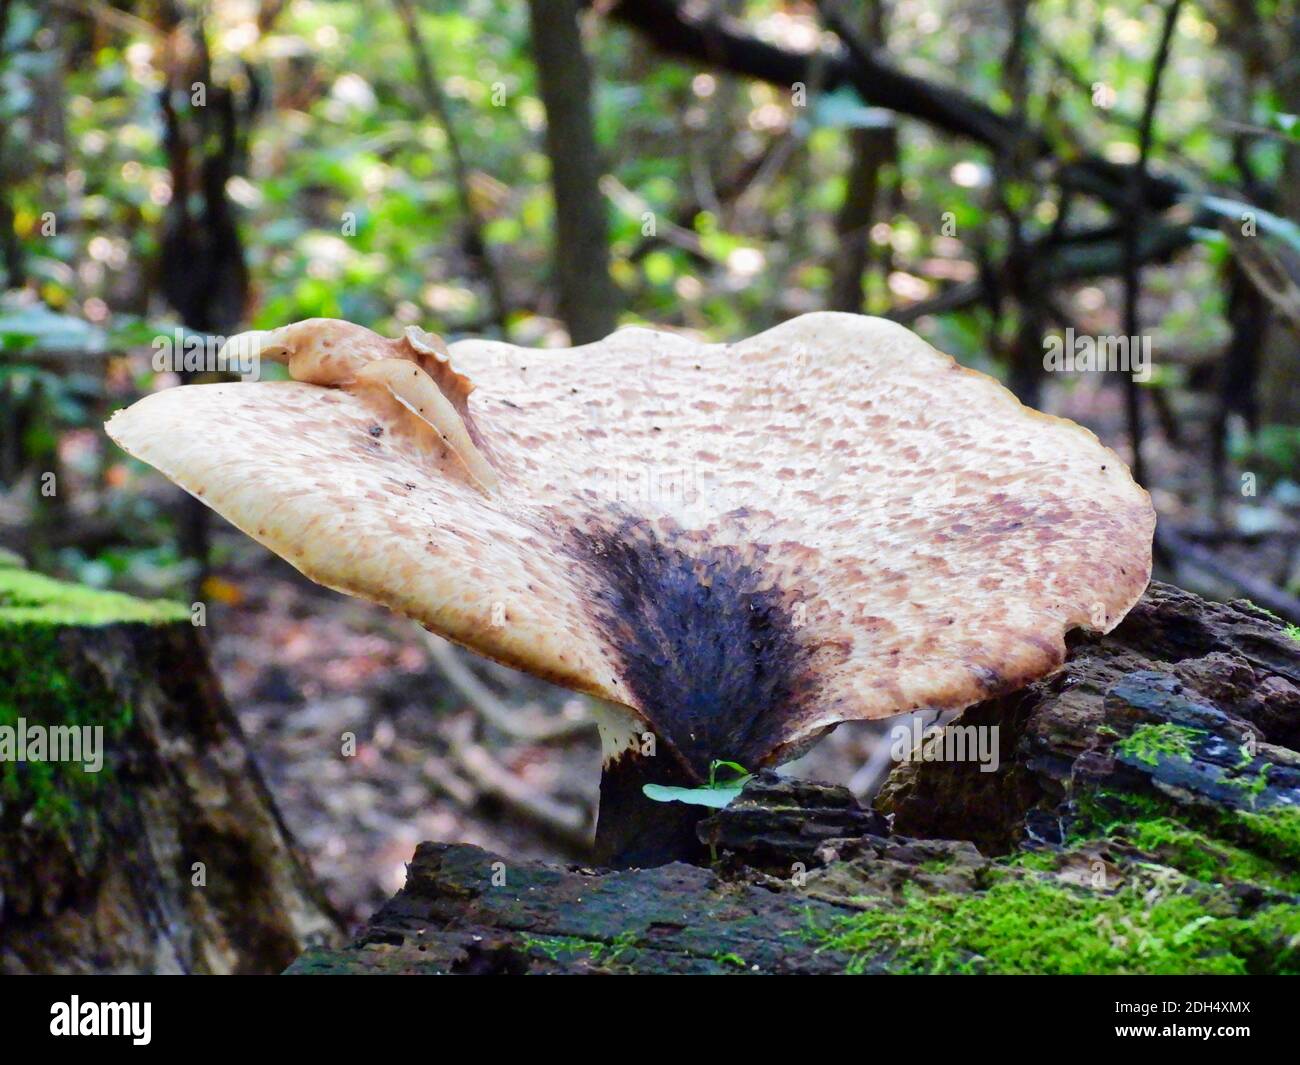 Mushroom in the forest: A large white and brown crowned mushroom fungi with dark stem and black middle with lopsided growth growing out a fallen tree Stock Photo